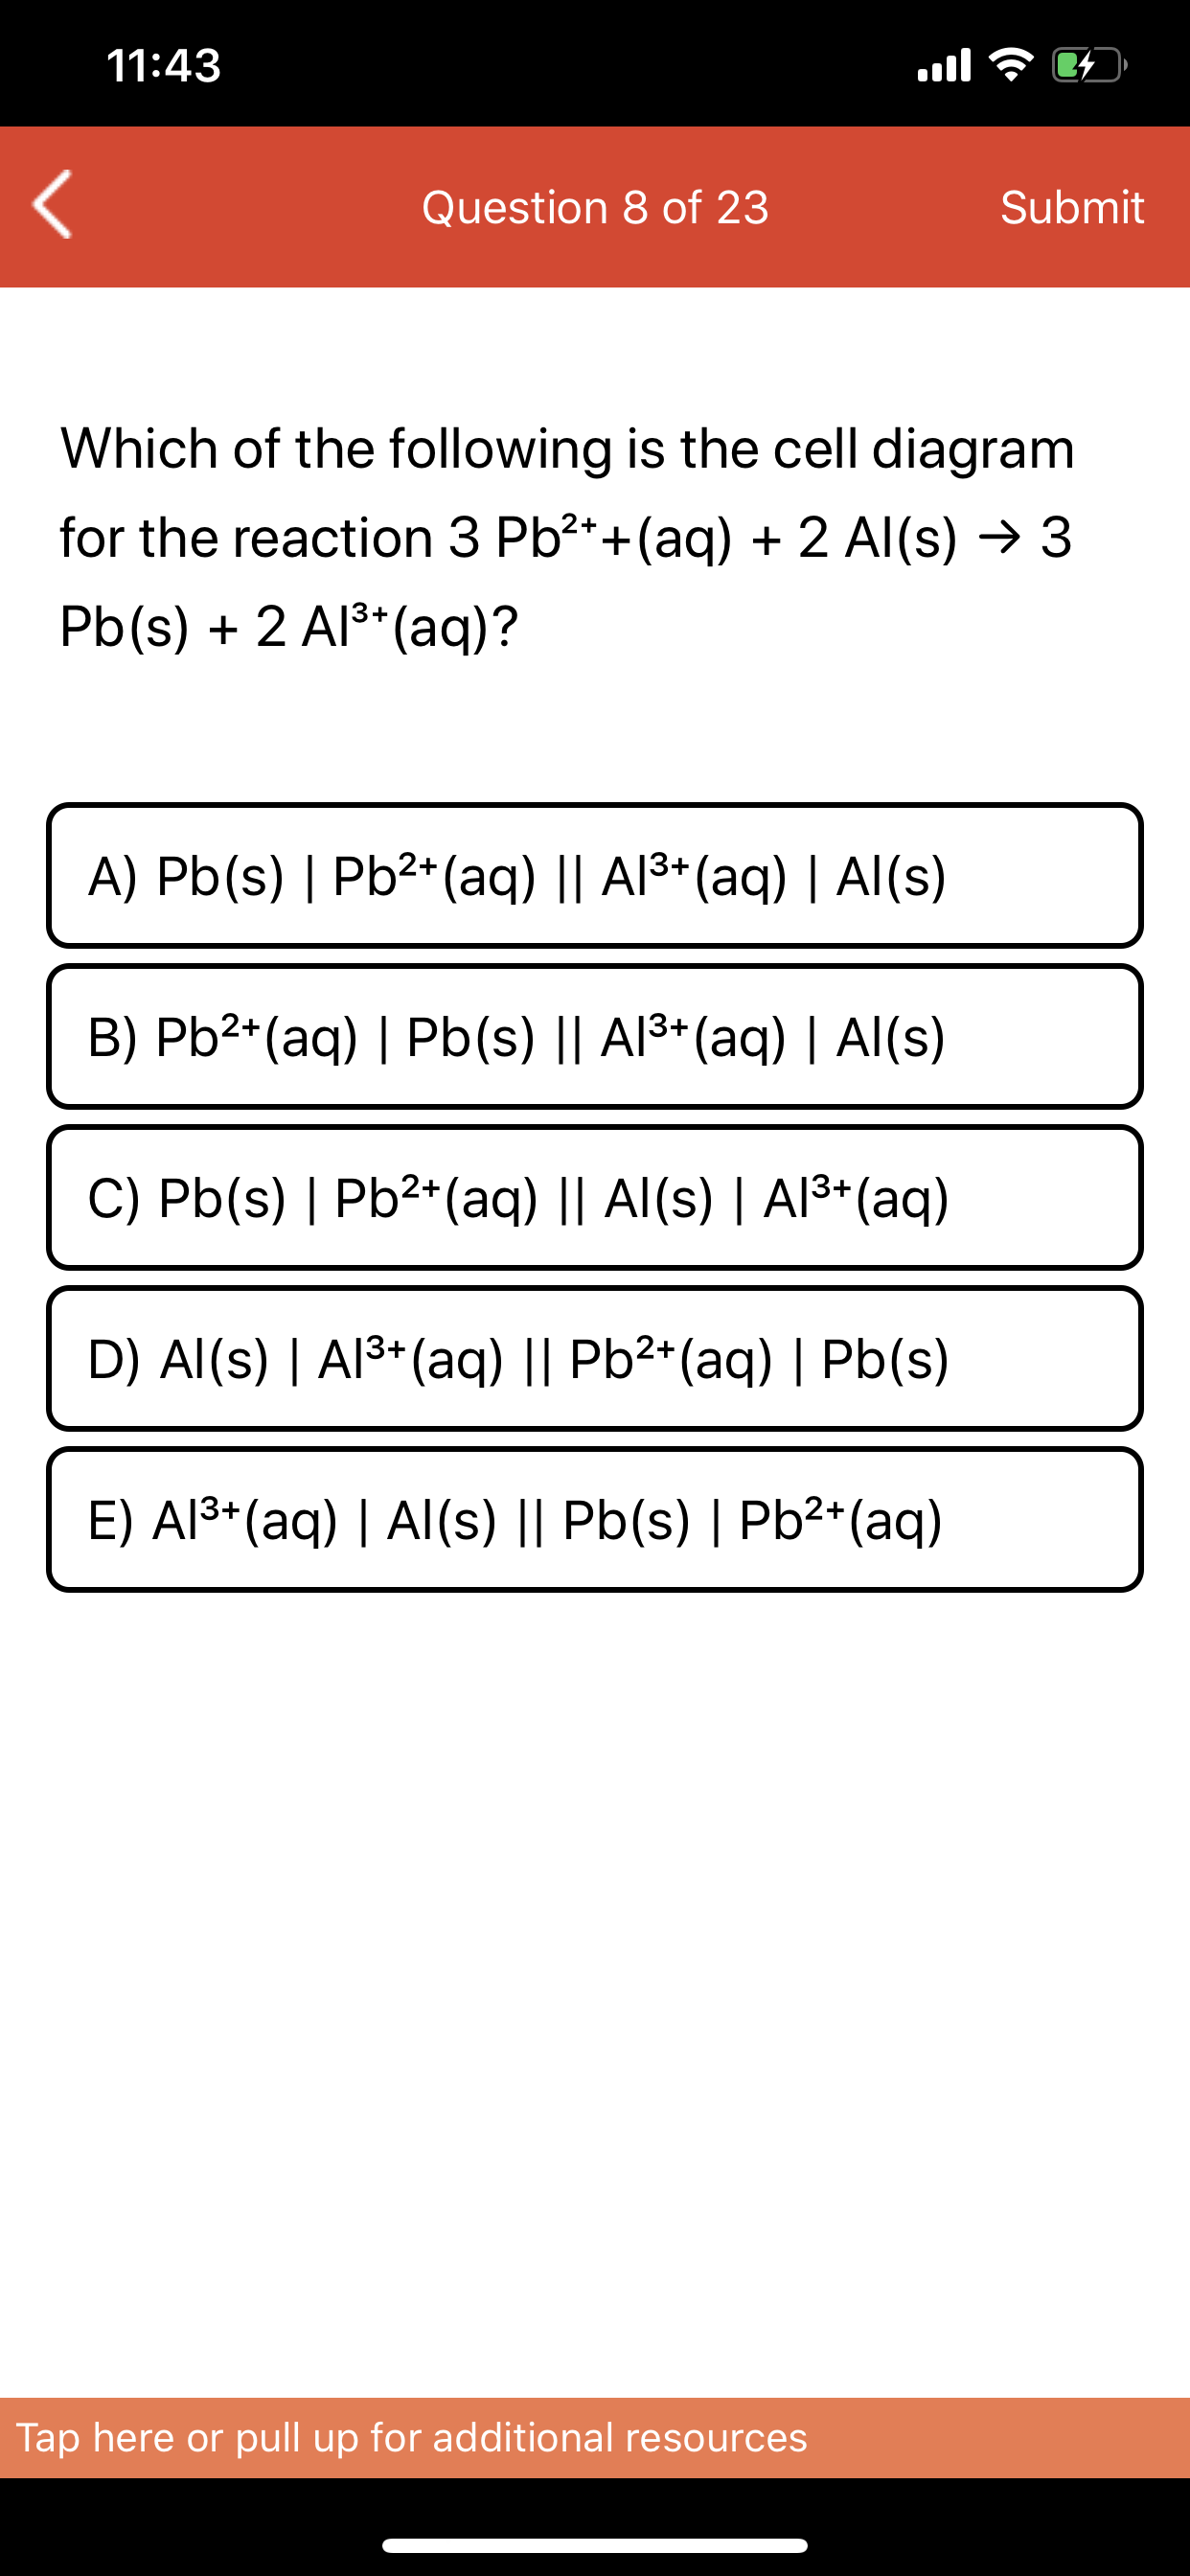 Which of the following is the cell diagram
for the reaction 3 Pb?*+(aq) + 2 Al(s) → 3
Pb(s) + 2 Al** (aq)?
A) Pb(s) | Pb²*(aq) || Al3+(aq) | Al(s)
B) Pb2*(aq) | Pb(s) || Al3*(aq) | AI(s)
C) Pb(s) | Pb²*(aq) || Al(s) | Al3+(aq)
D) Al(s) | Al³*(aq) || Pb²*(aq) | Pb(s)
E) Al³*(aq) | Al(s) || Pb(s) | Pb²*(aq)
